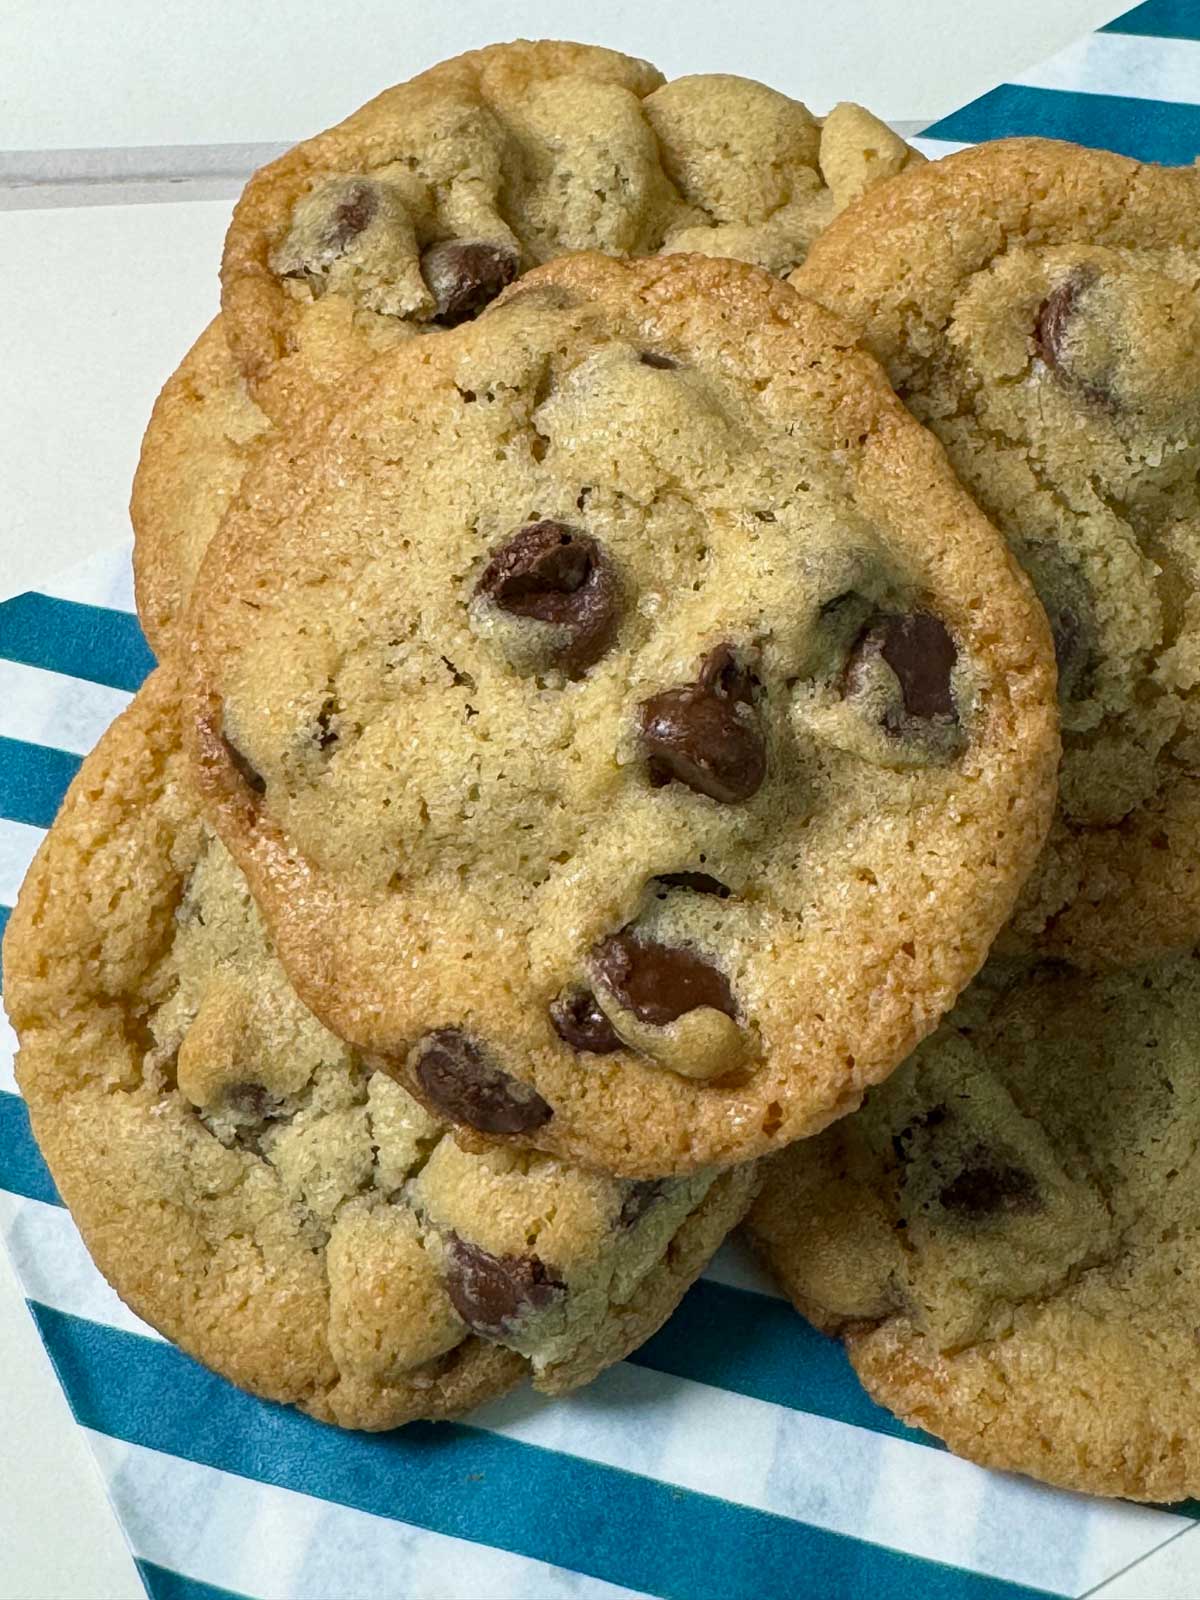 Classic Crunchy Chocolate Chip Cookies from The King Arthur Cookie Companion.